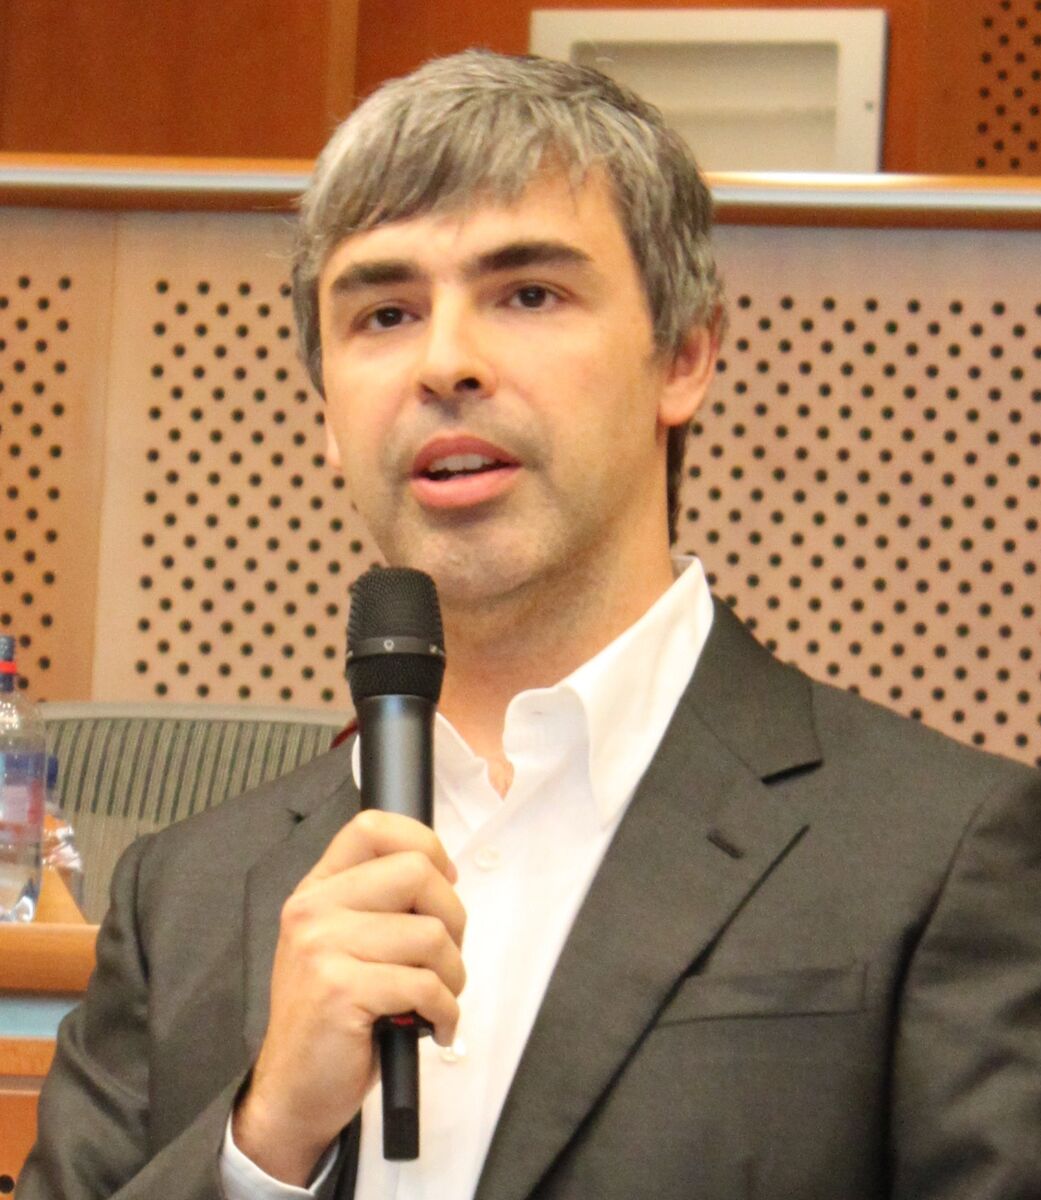 Larry Page net worth in Billionaires category